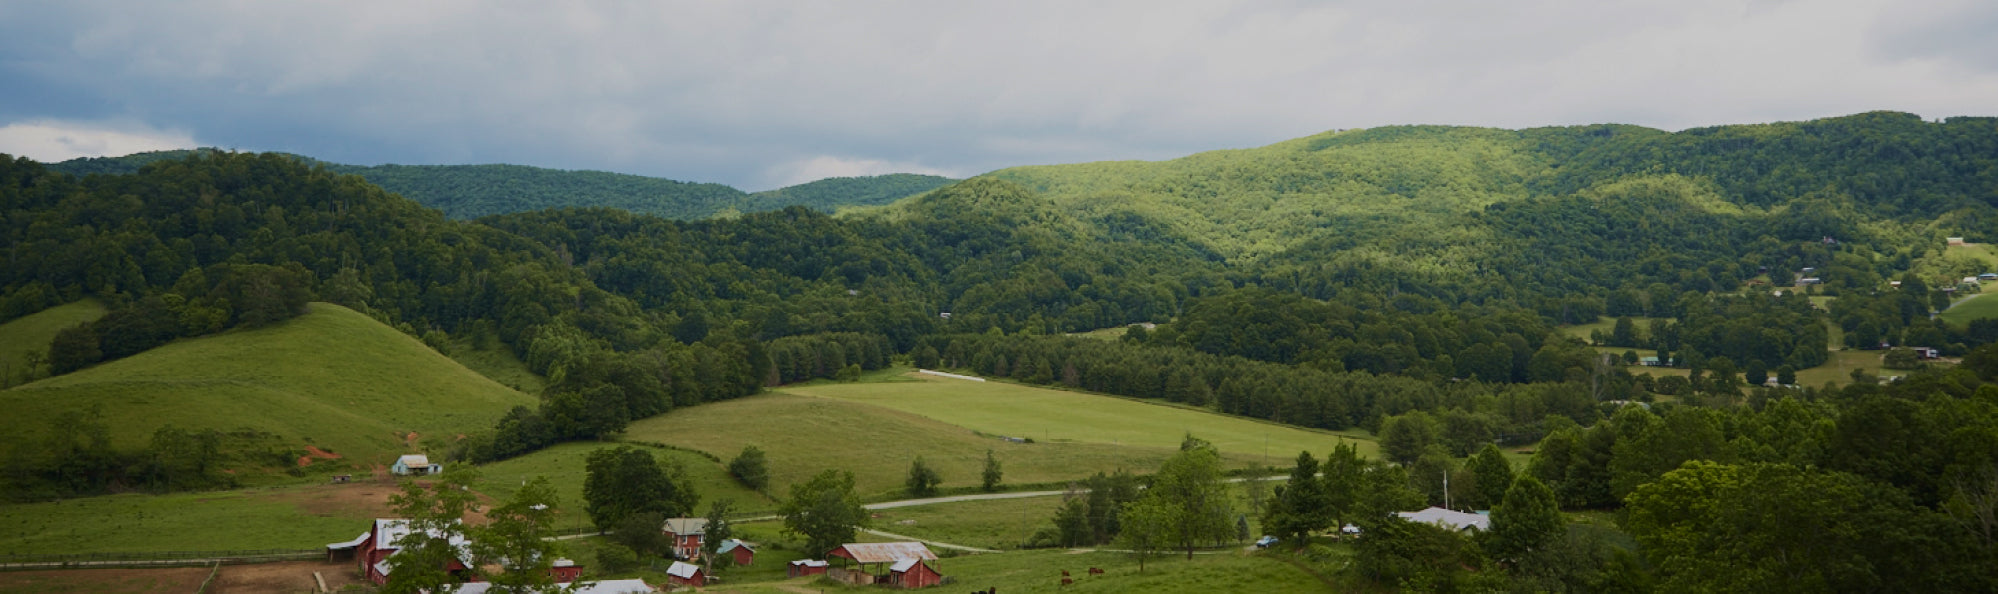 Pasture raised beef in the Appalachian Mountains of North Carolina for generations